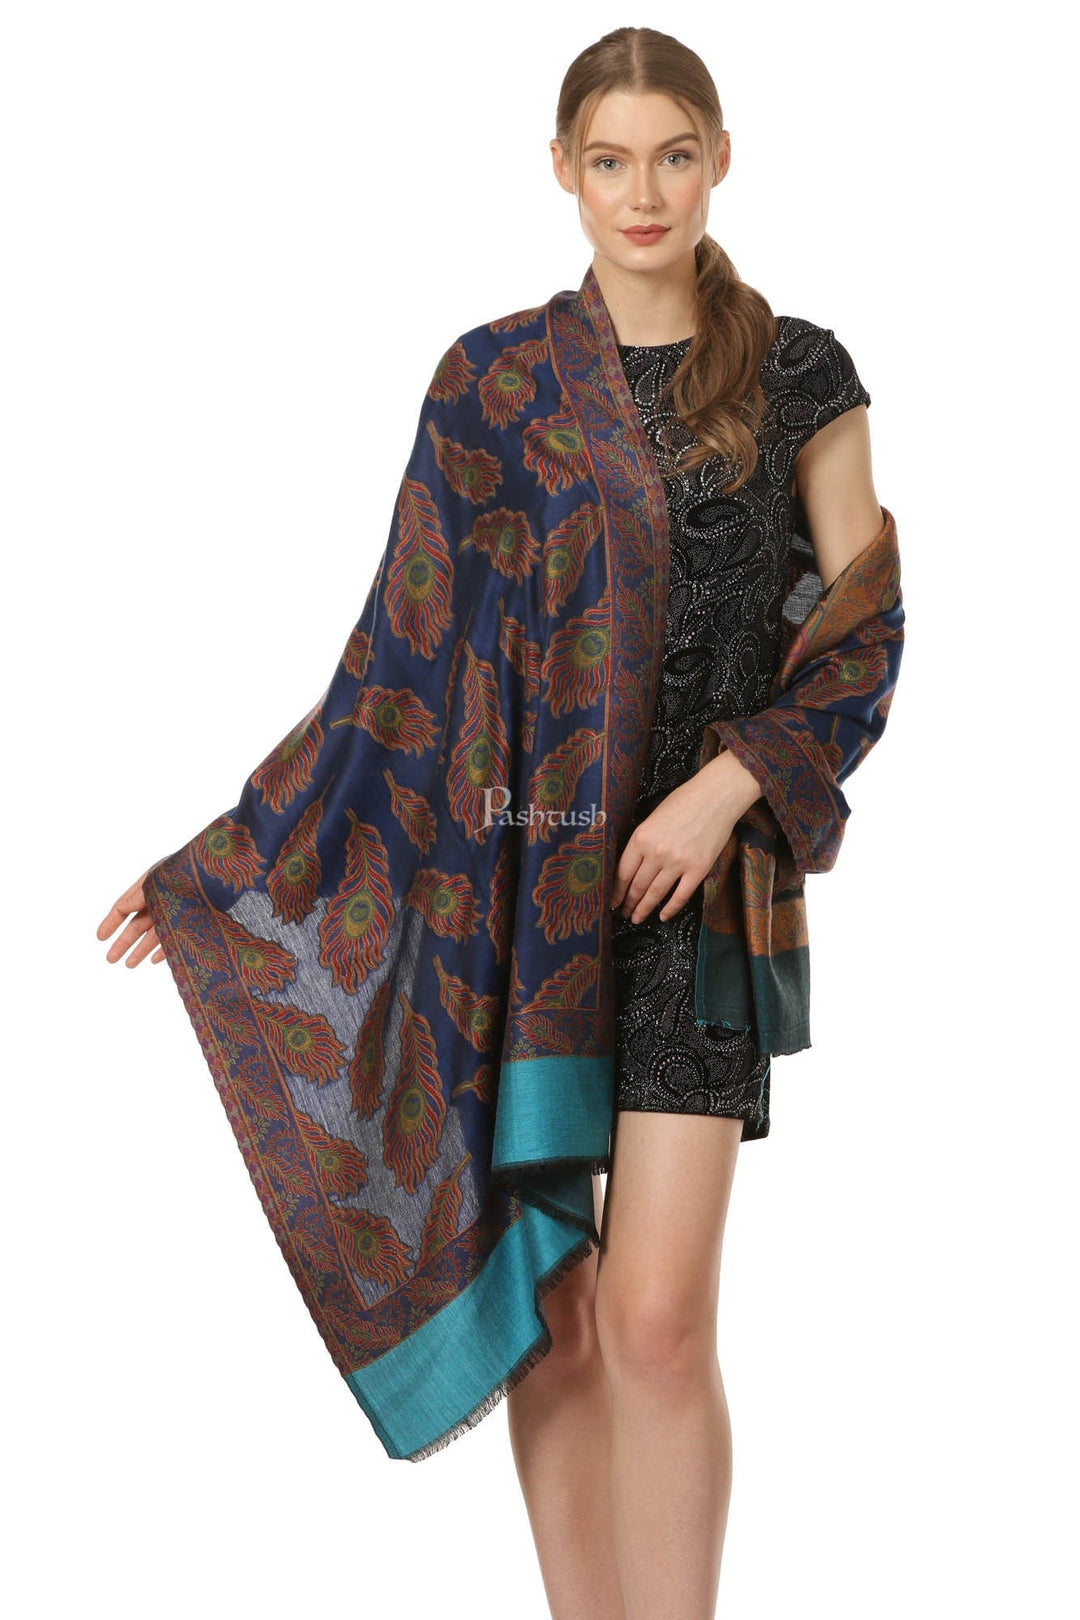 Pashtush India Womens Stoles and Scarves Scarf Pashtush Womens Bamboo Scarf, Woven Peacock Design, Soft And Natural